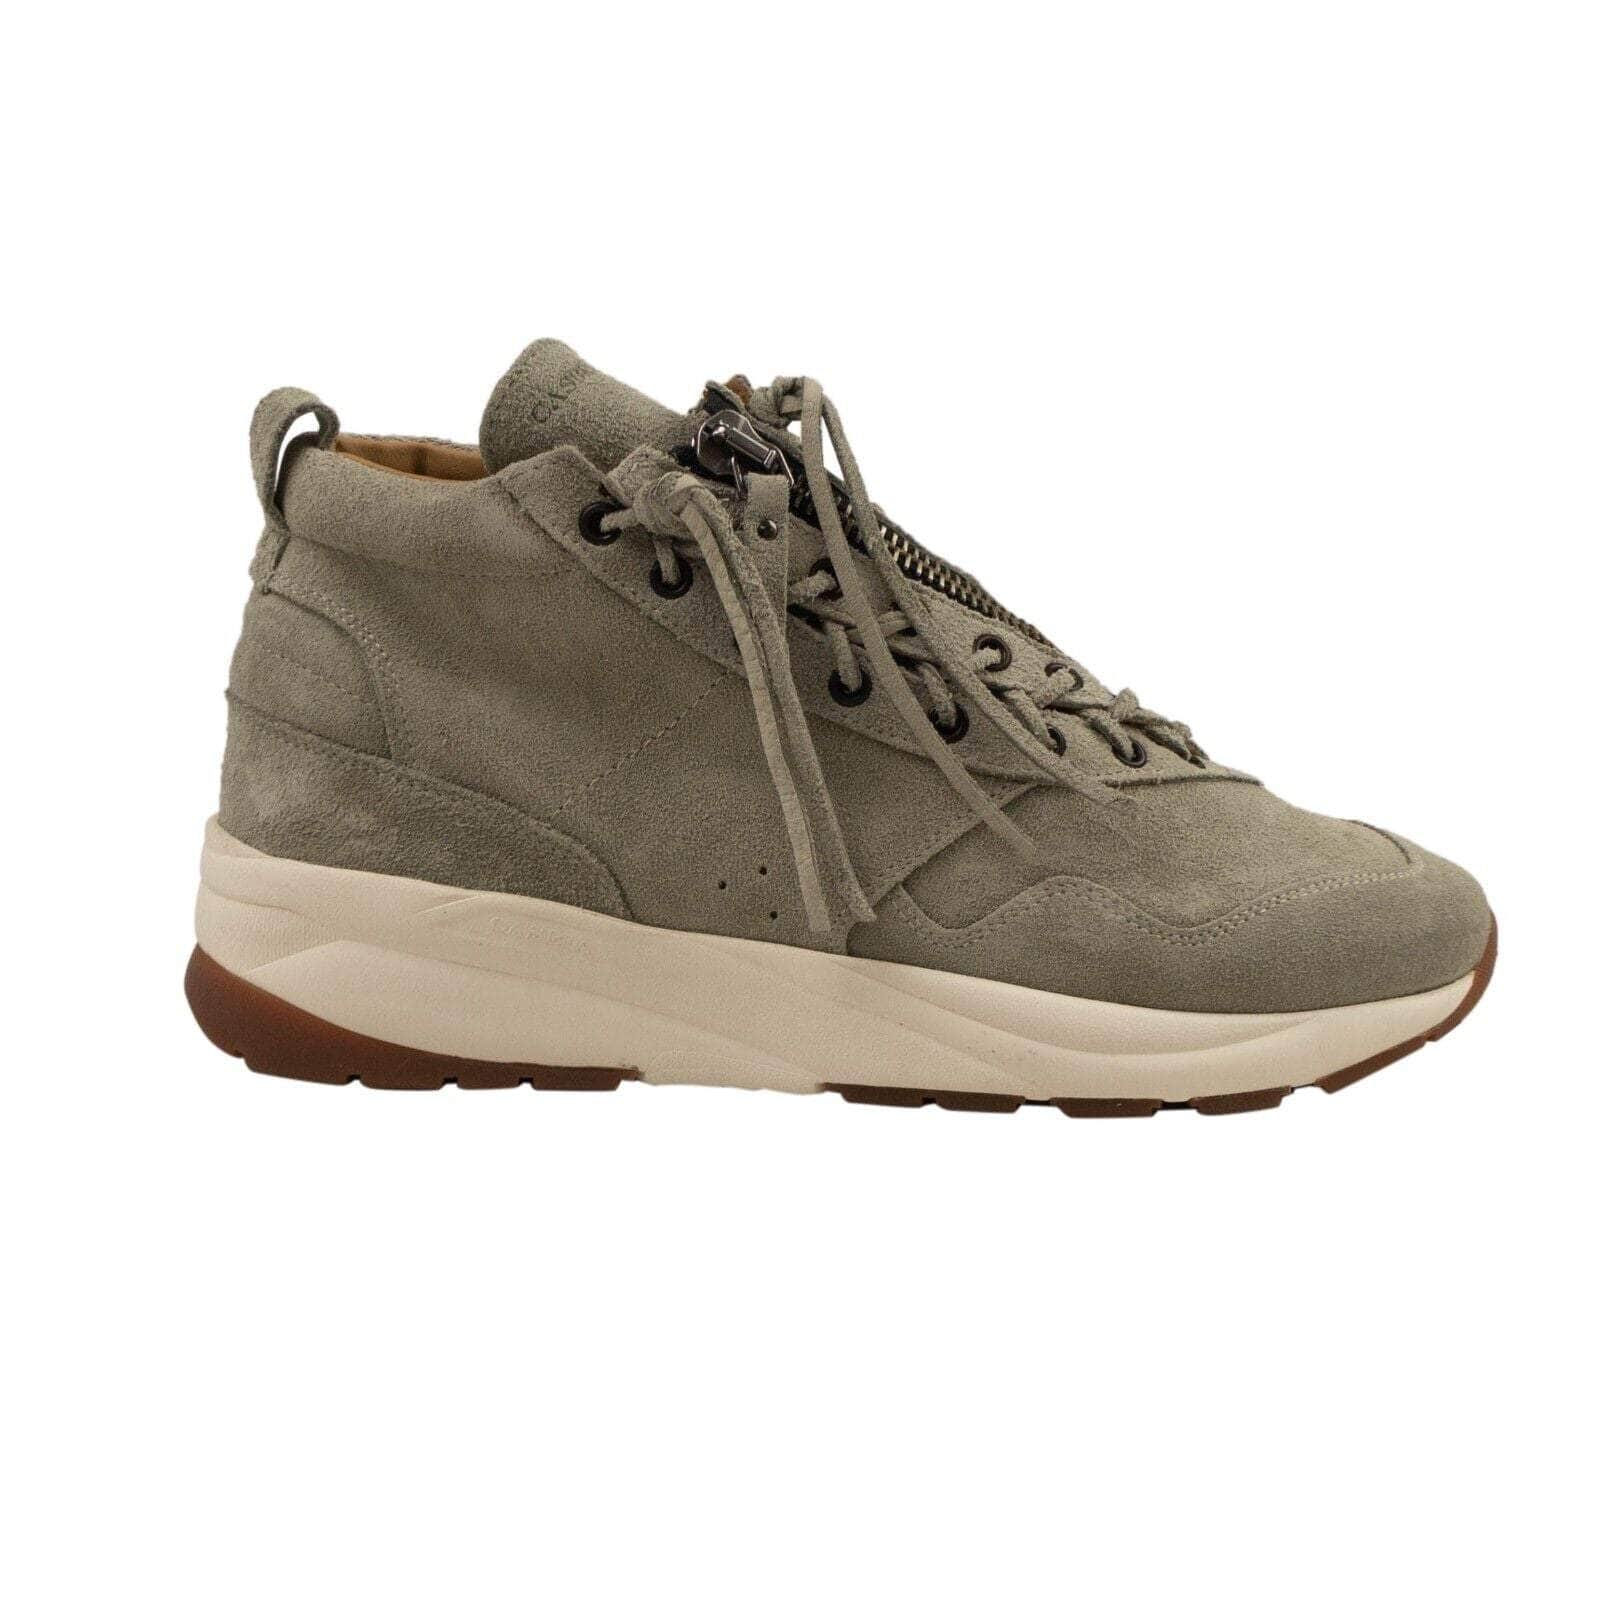 Casbia casbia, channelenable-all, chicmi, couponcollection, gender-mens, main-shoes, mens-shoes, MixedApparel, size-40, size-41, size-42, size-43, size-44, size-45, size-46, under-250 Sand Gray AWOL AP Lace Up Sneakers